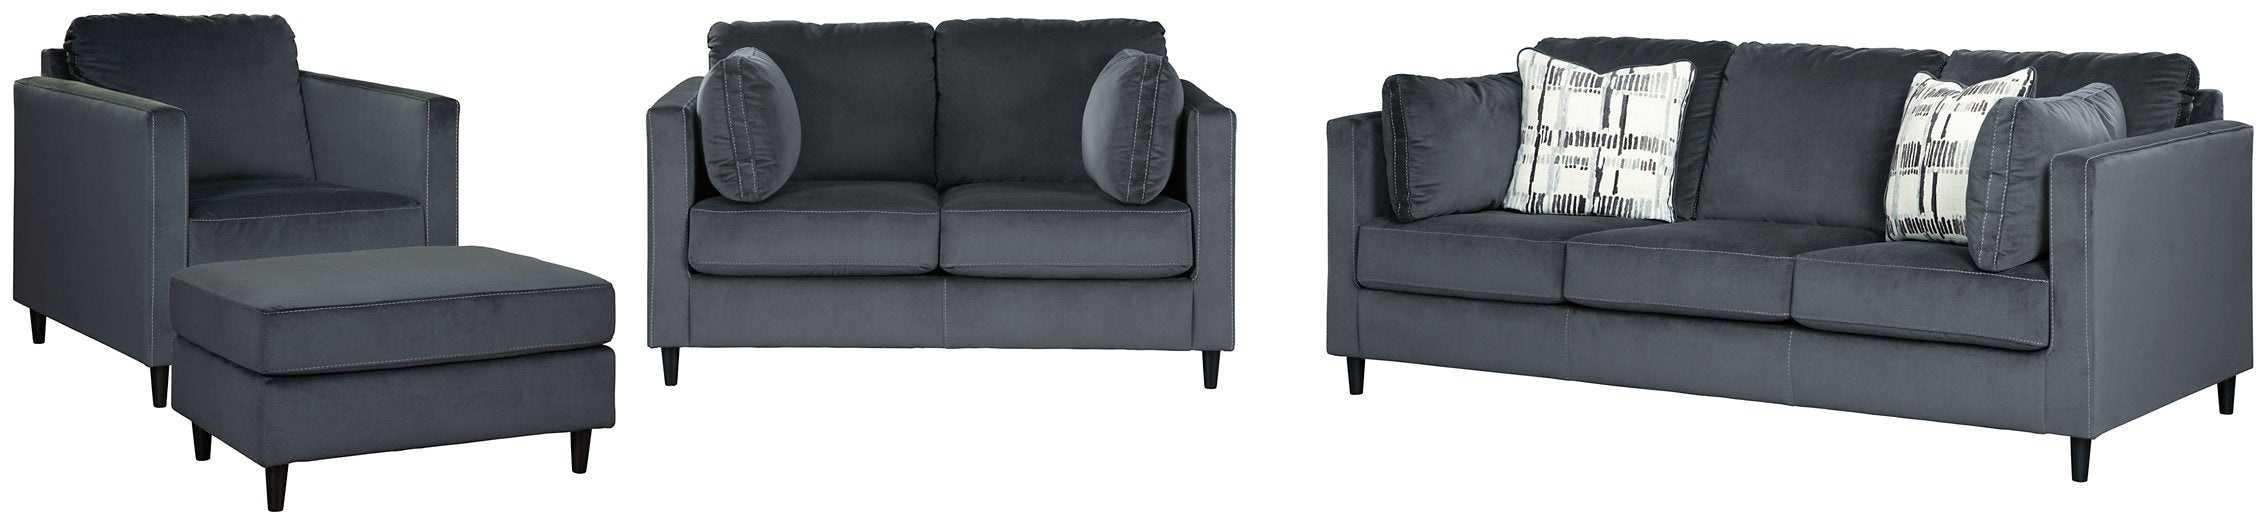 Kennewick 4-Piece Upholstery Package